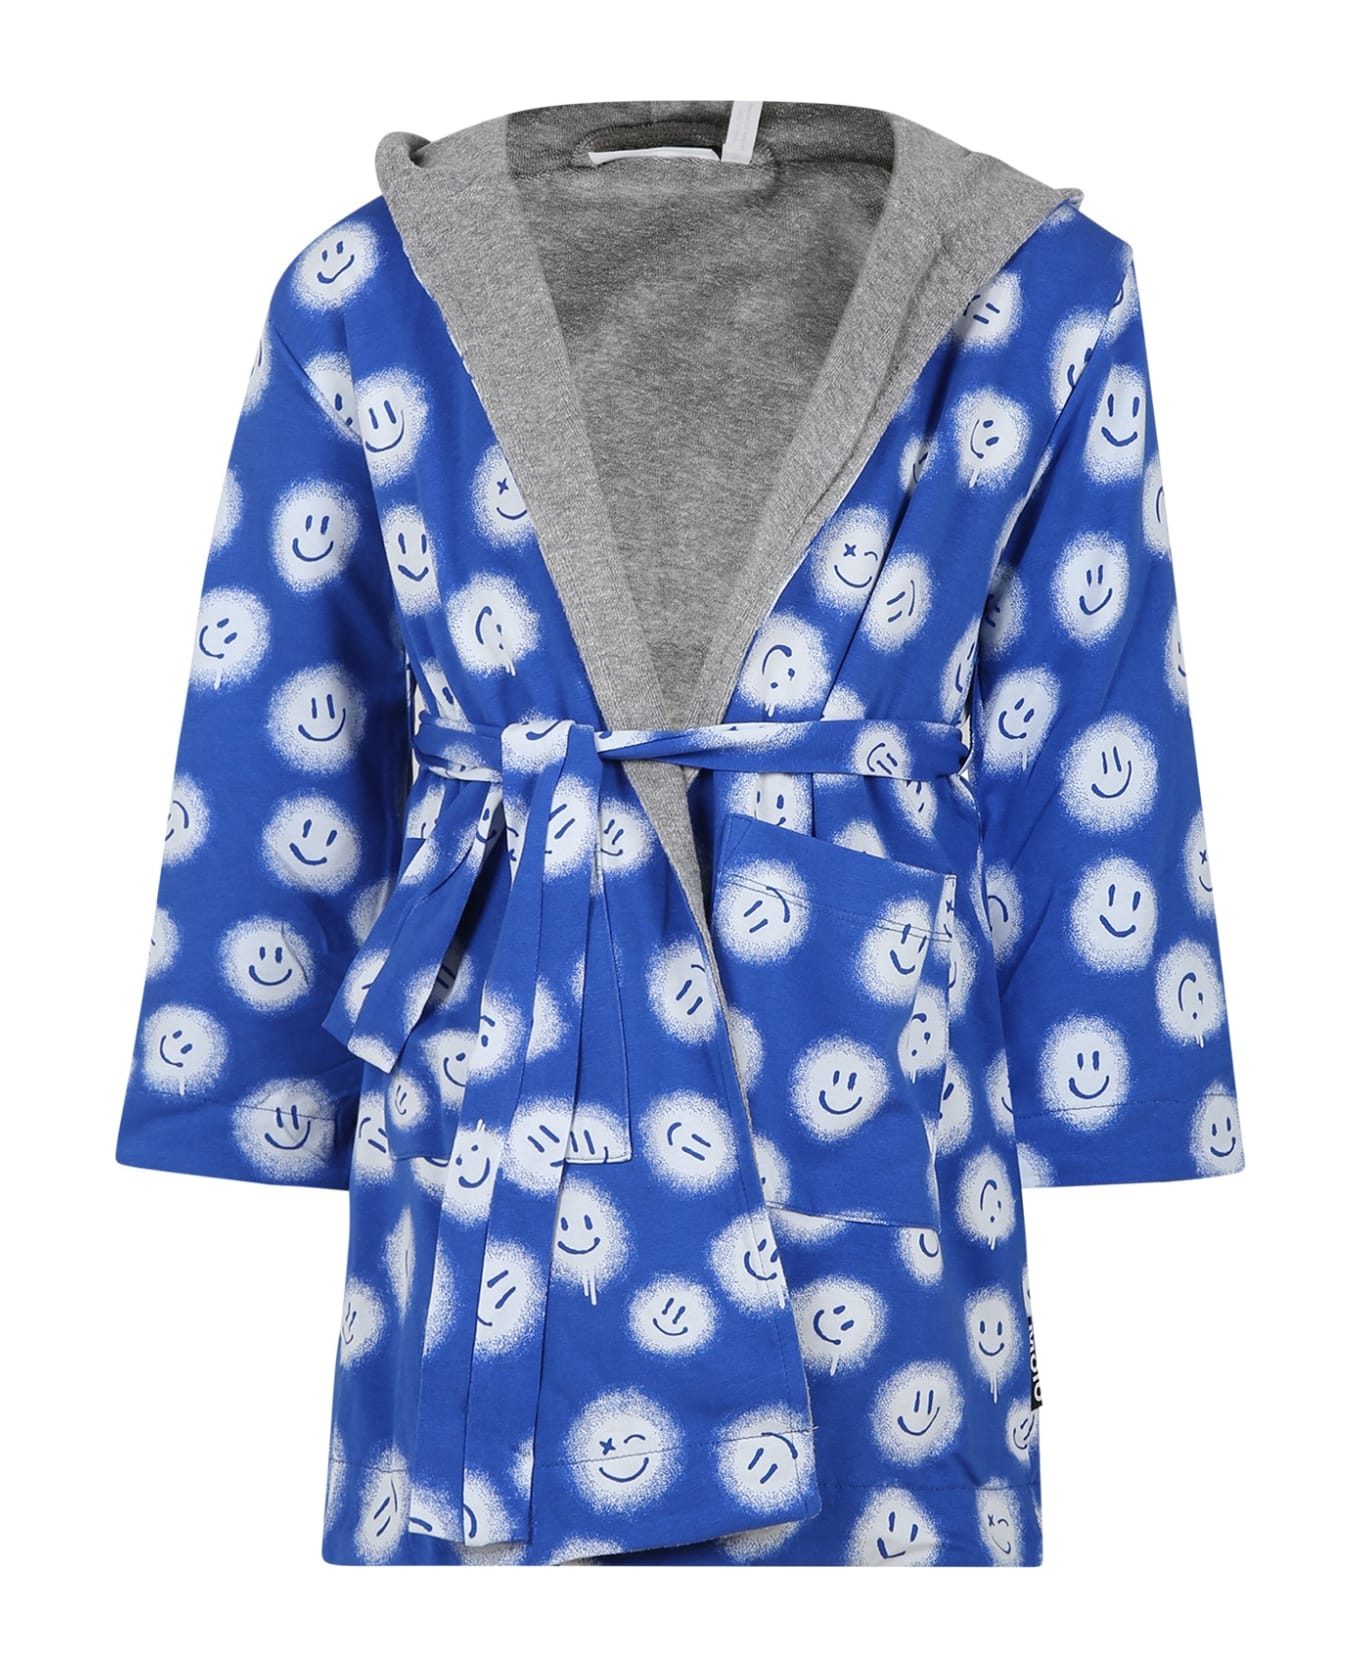 Molo Blue Dressing Gown For Kids With Smiley - Blue ジャンプスーツ